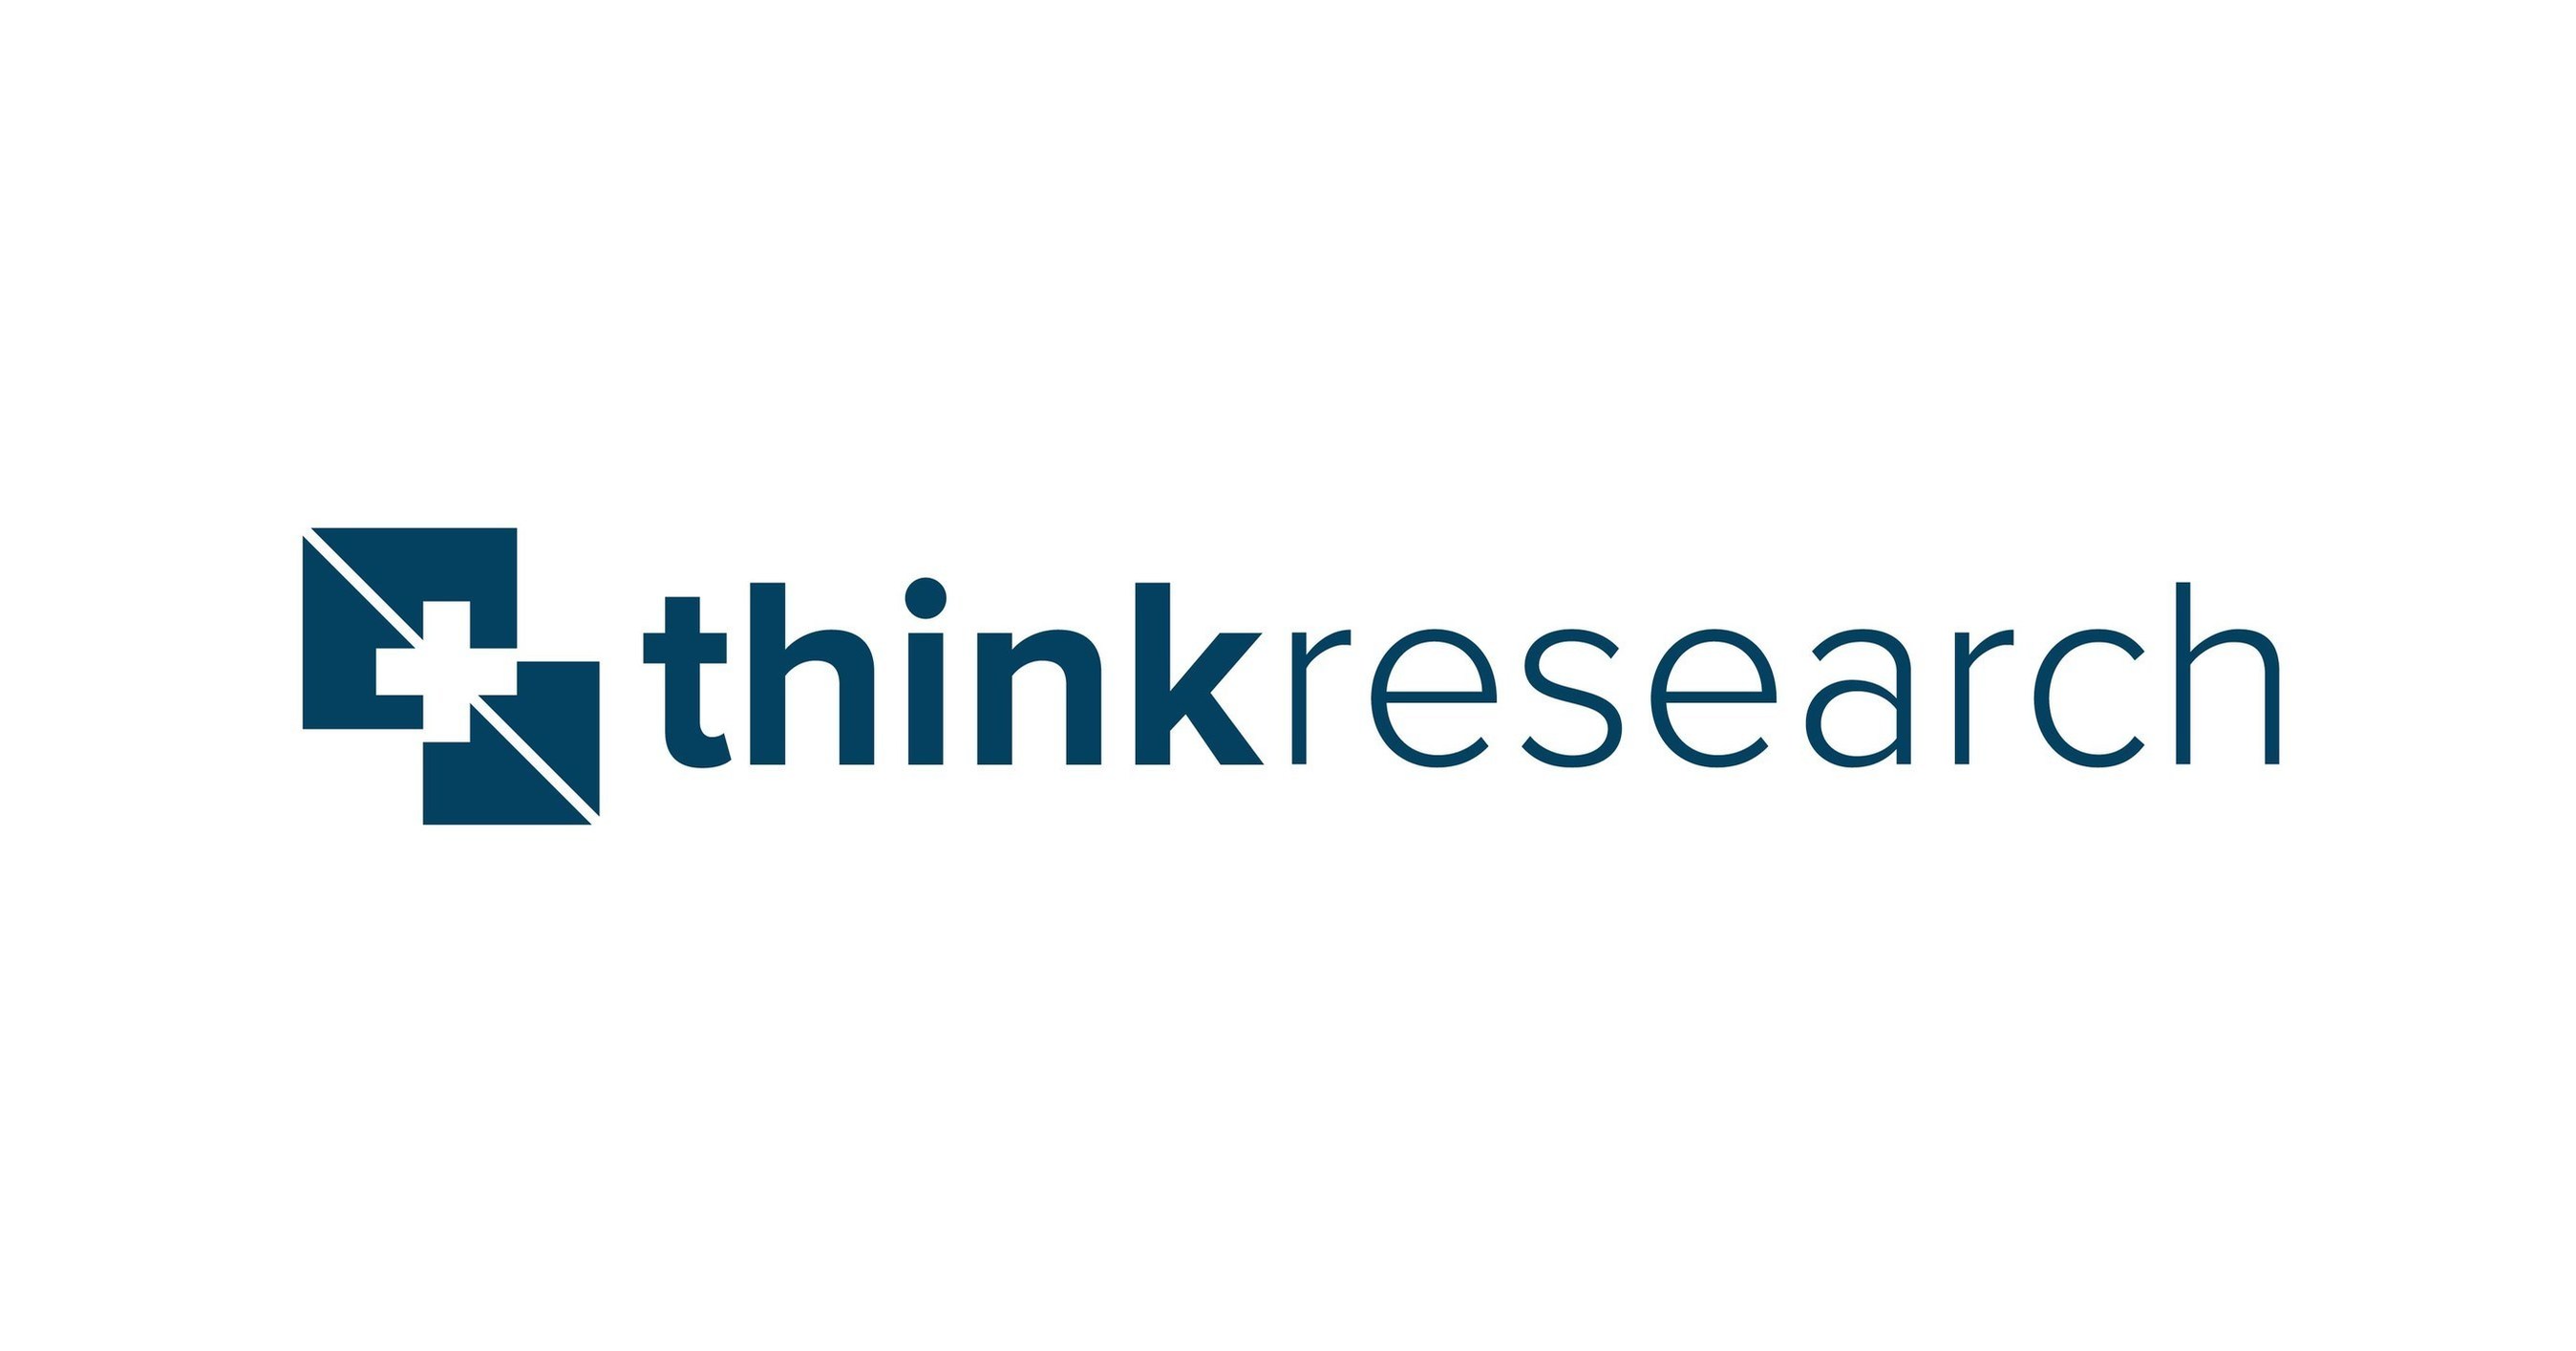 think research.com